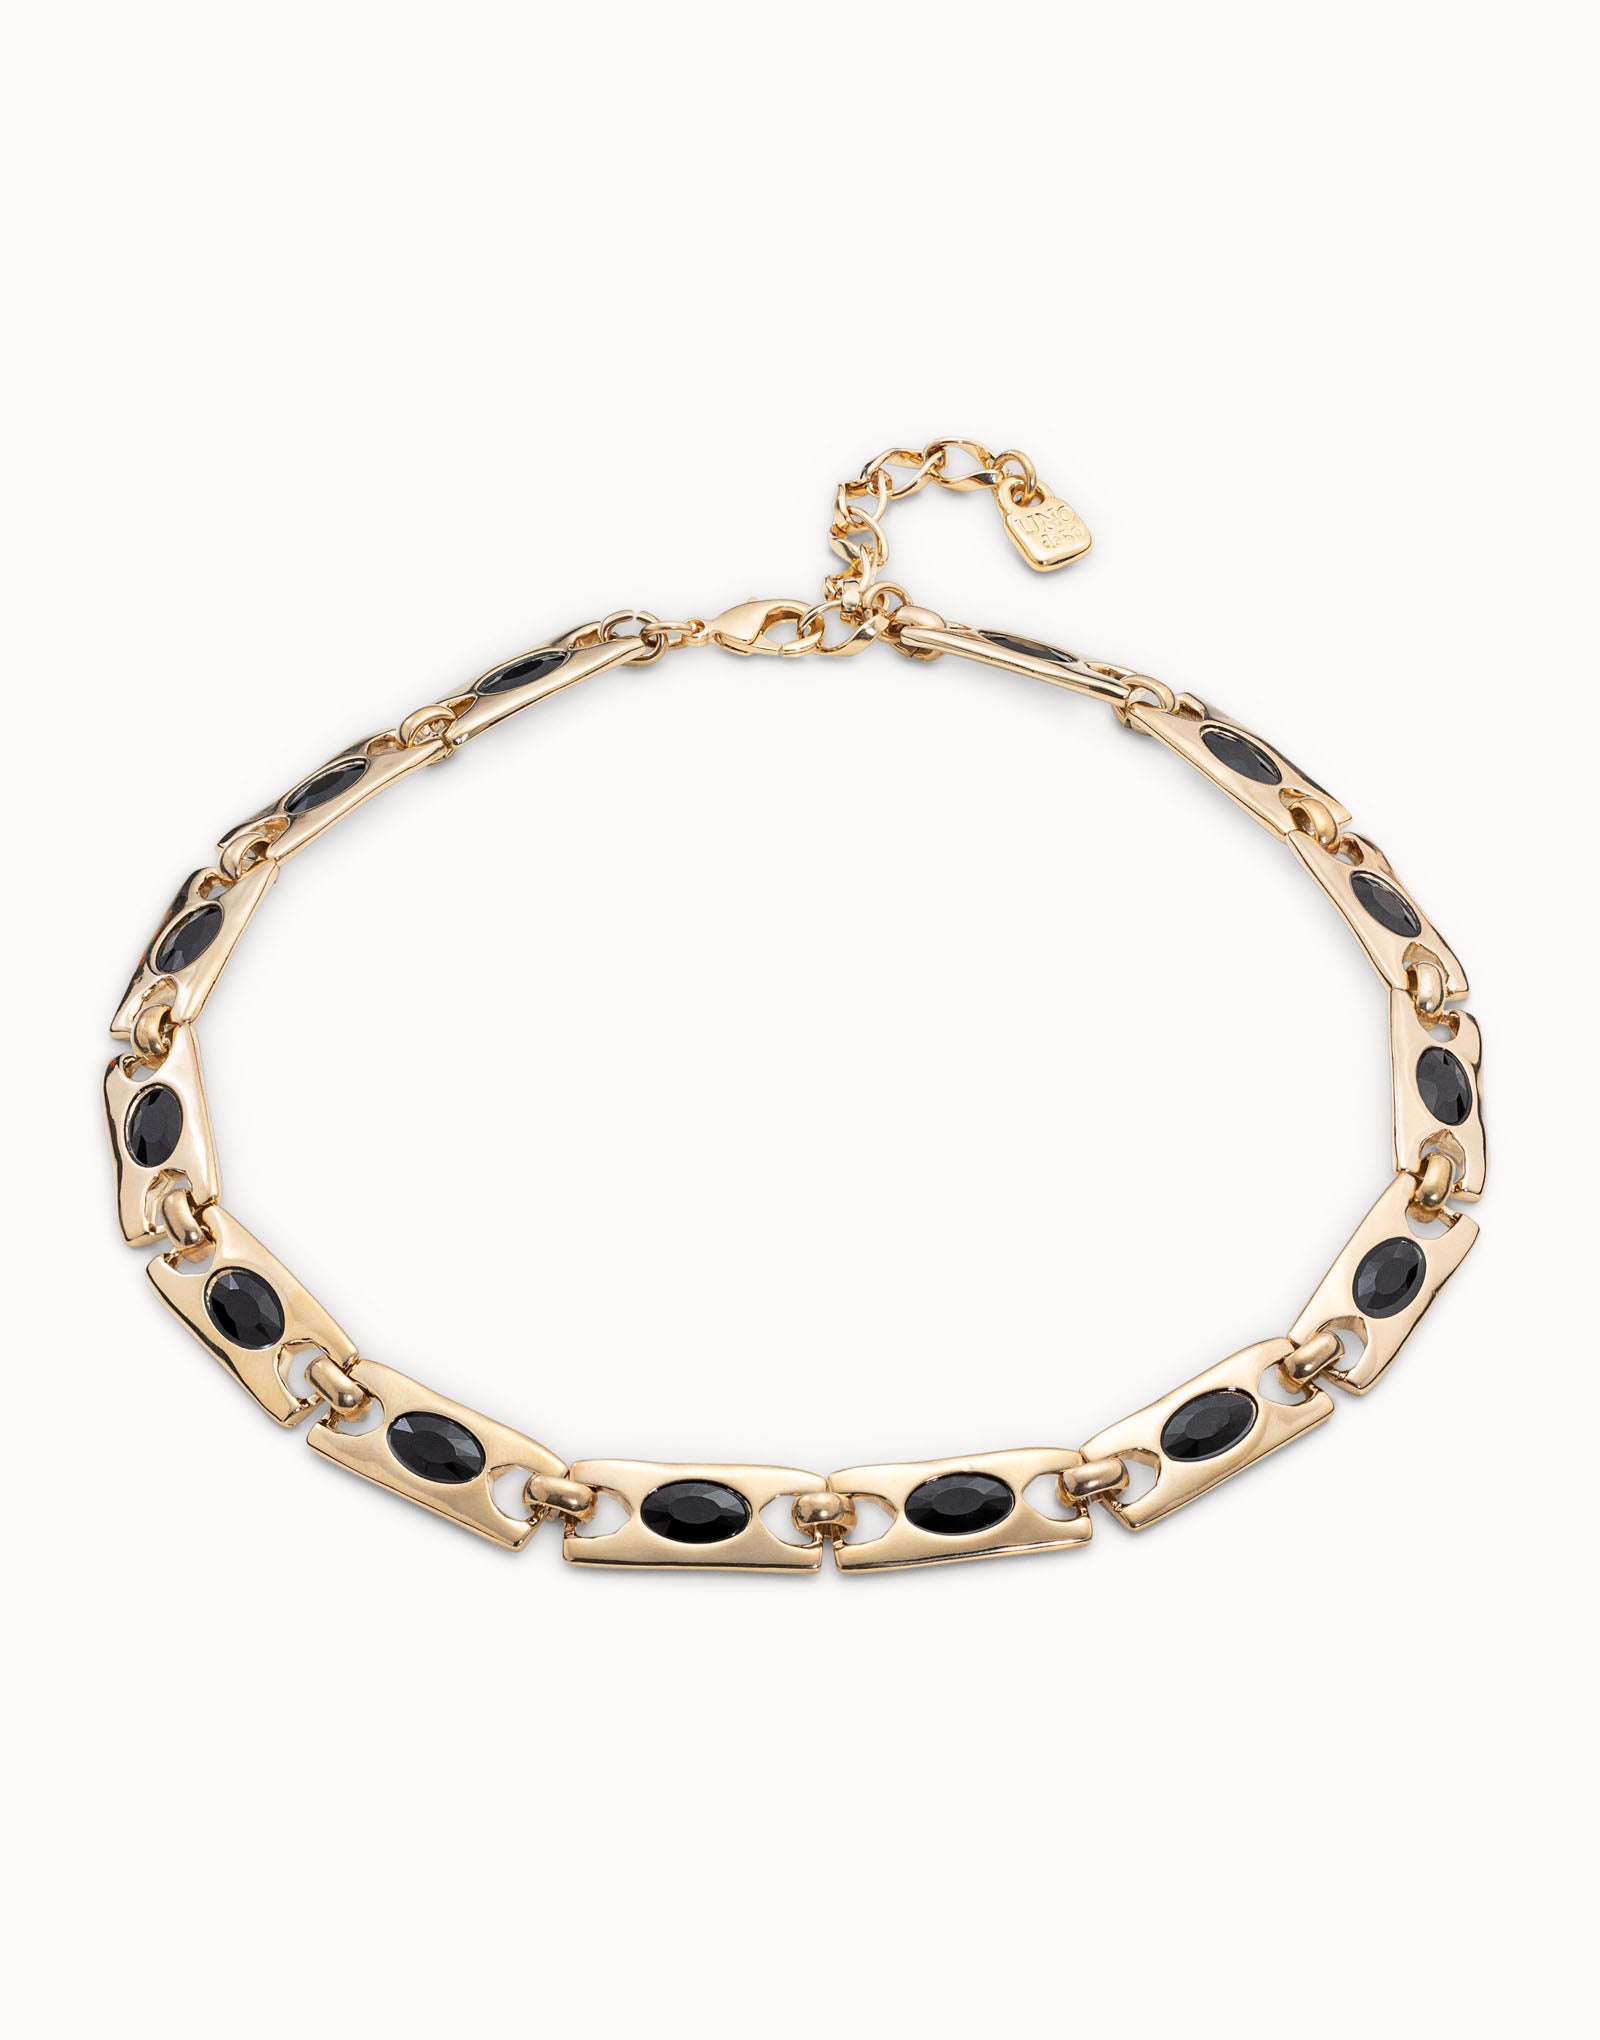 COLLAR THE CROWN (Gold-Plated) | Uno de 50 | Luby 